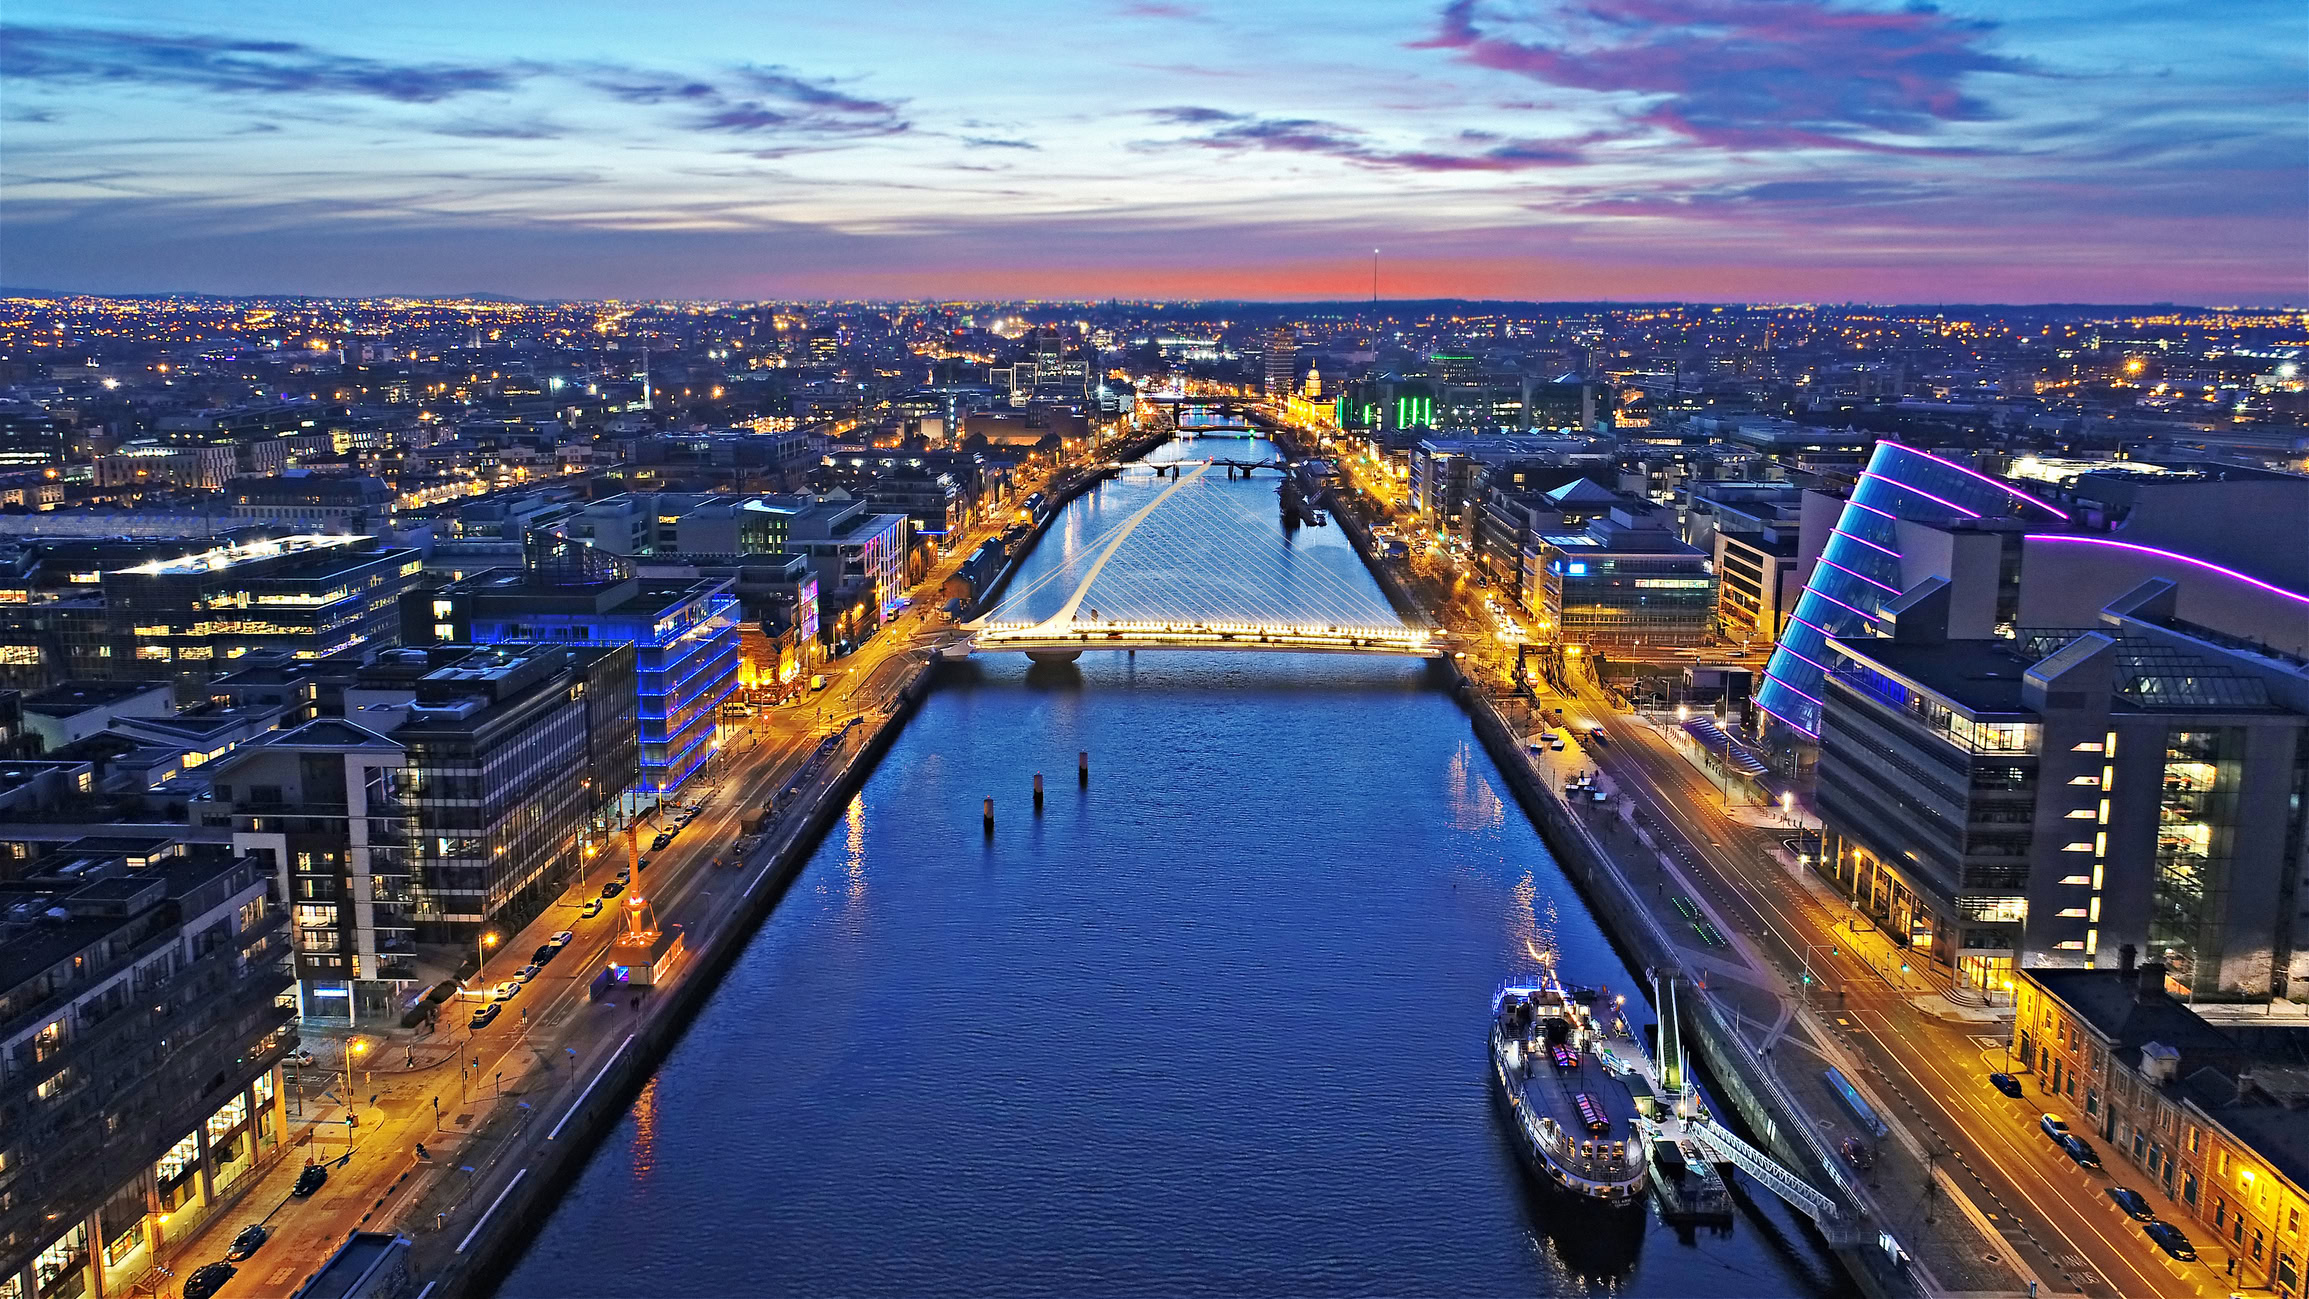 Aerial view of Dublin at dusk, featuring a river with illuminated bridges, modern buildings on both sides, and a colorful sky in the background. The cityscape comes alive as if in perfect harmony, reminiscent of SYNCHRO Sessions.